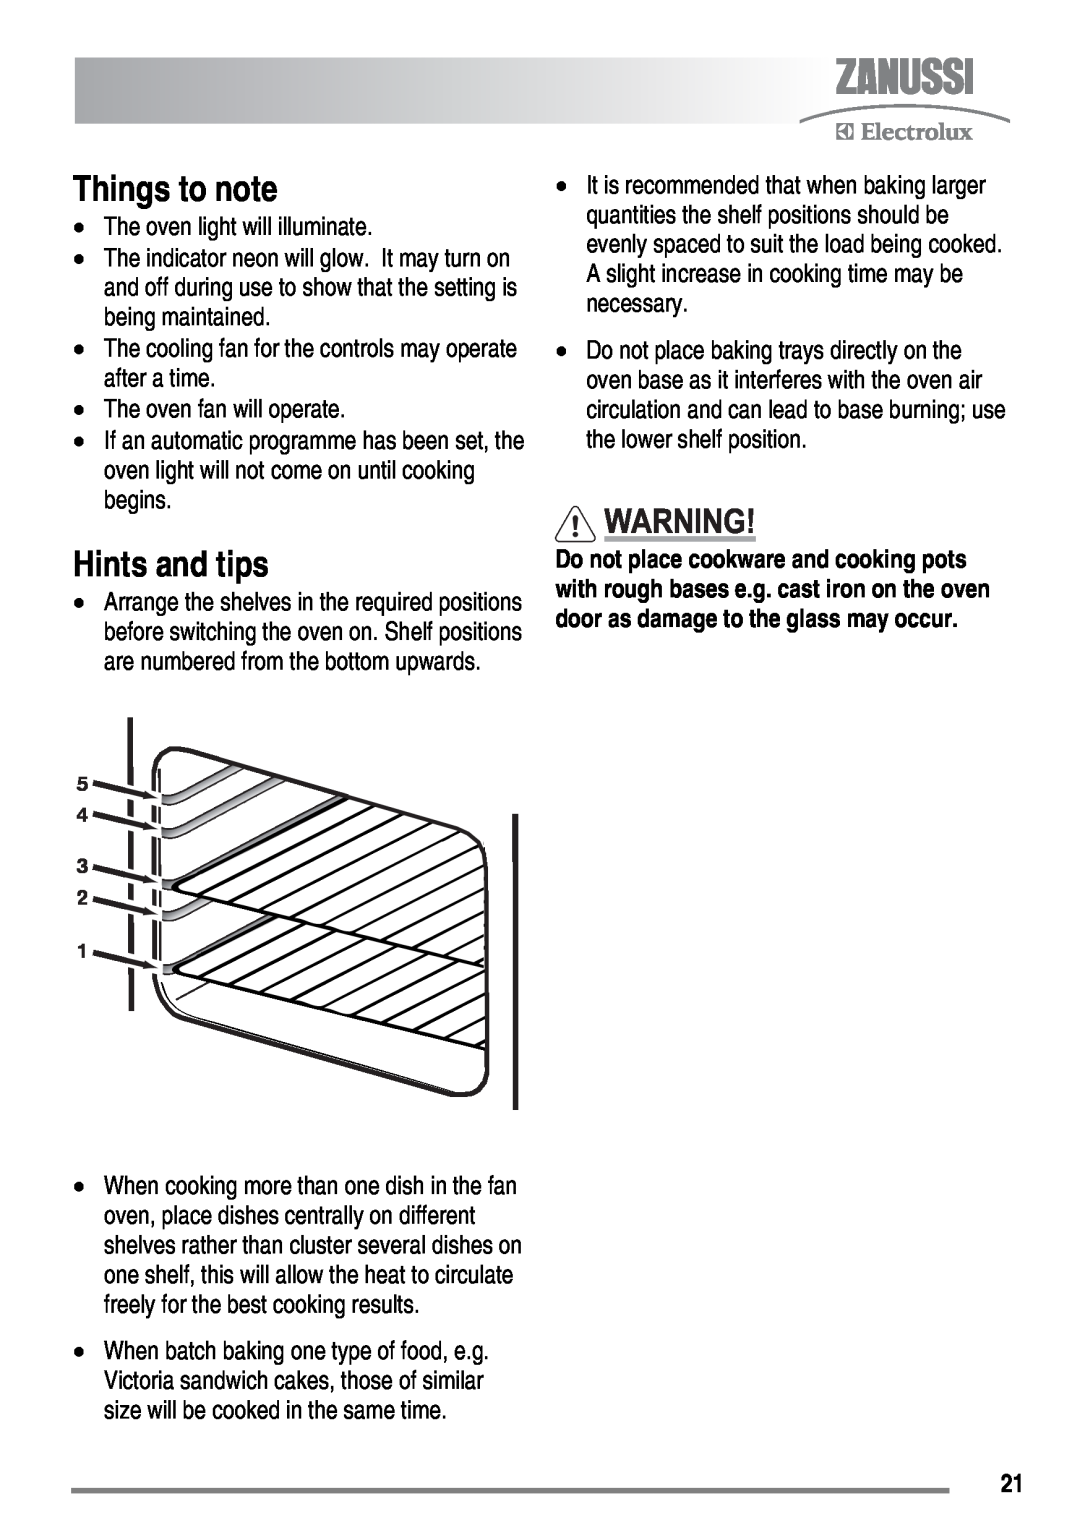 Zanussi ZKM6040 user manual Things to note, Hints and tips 